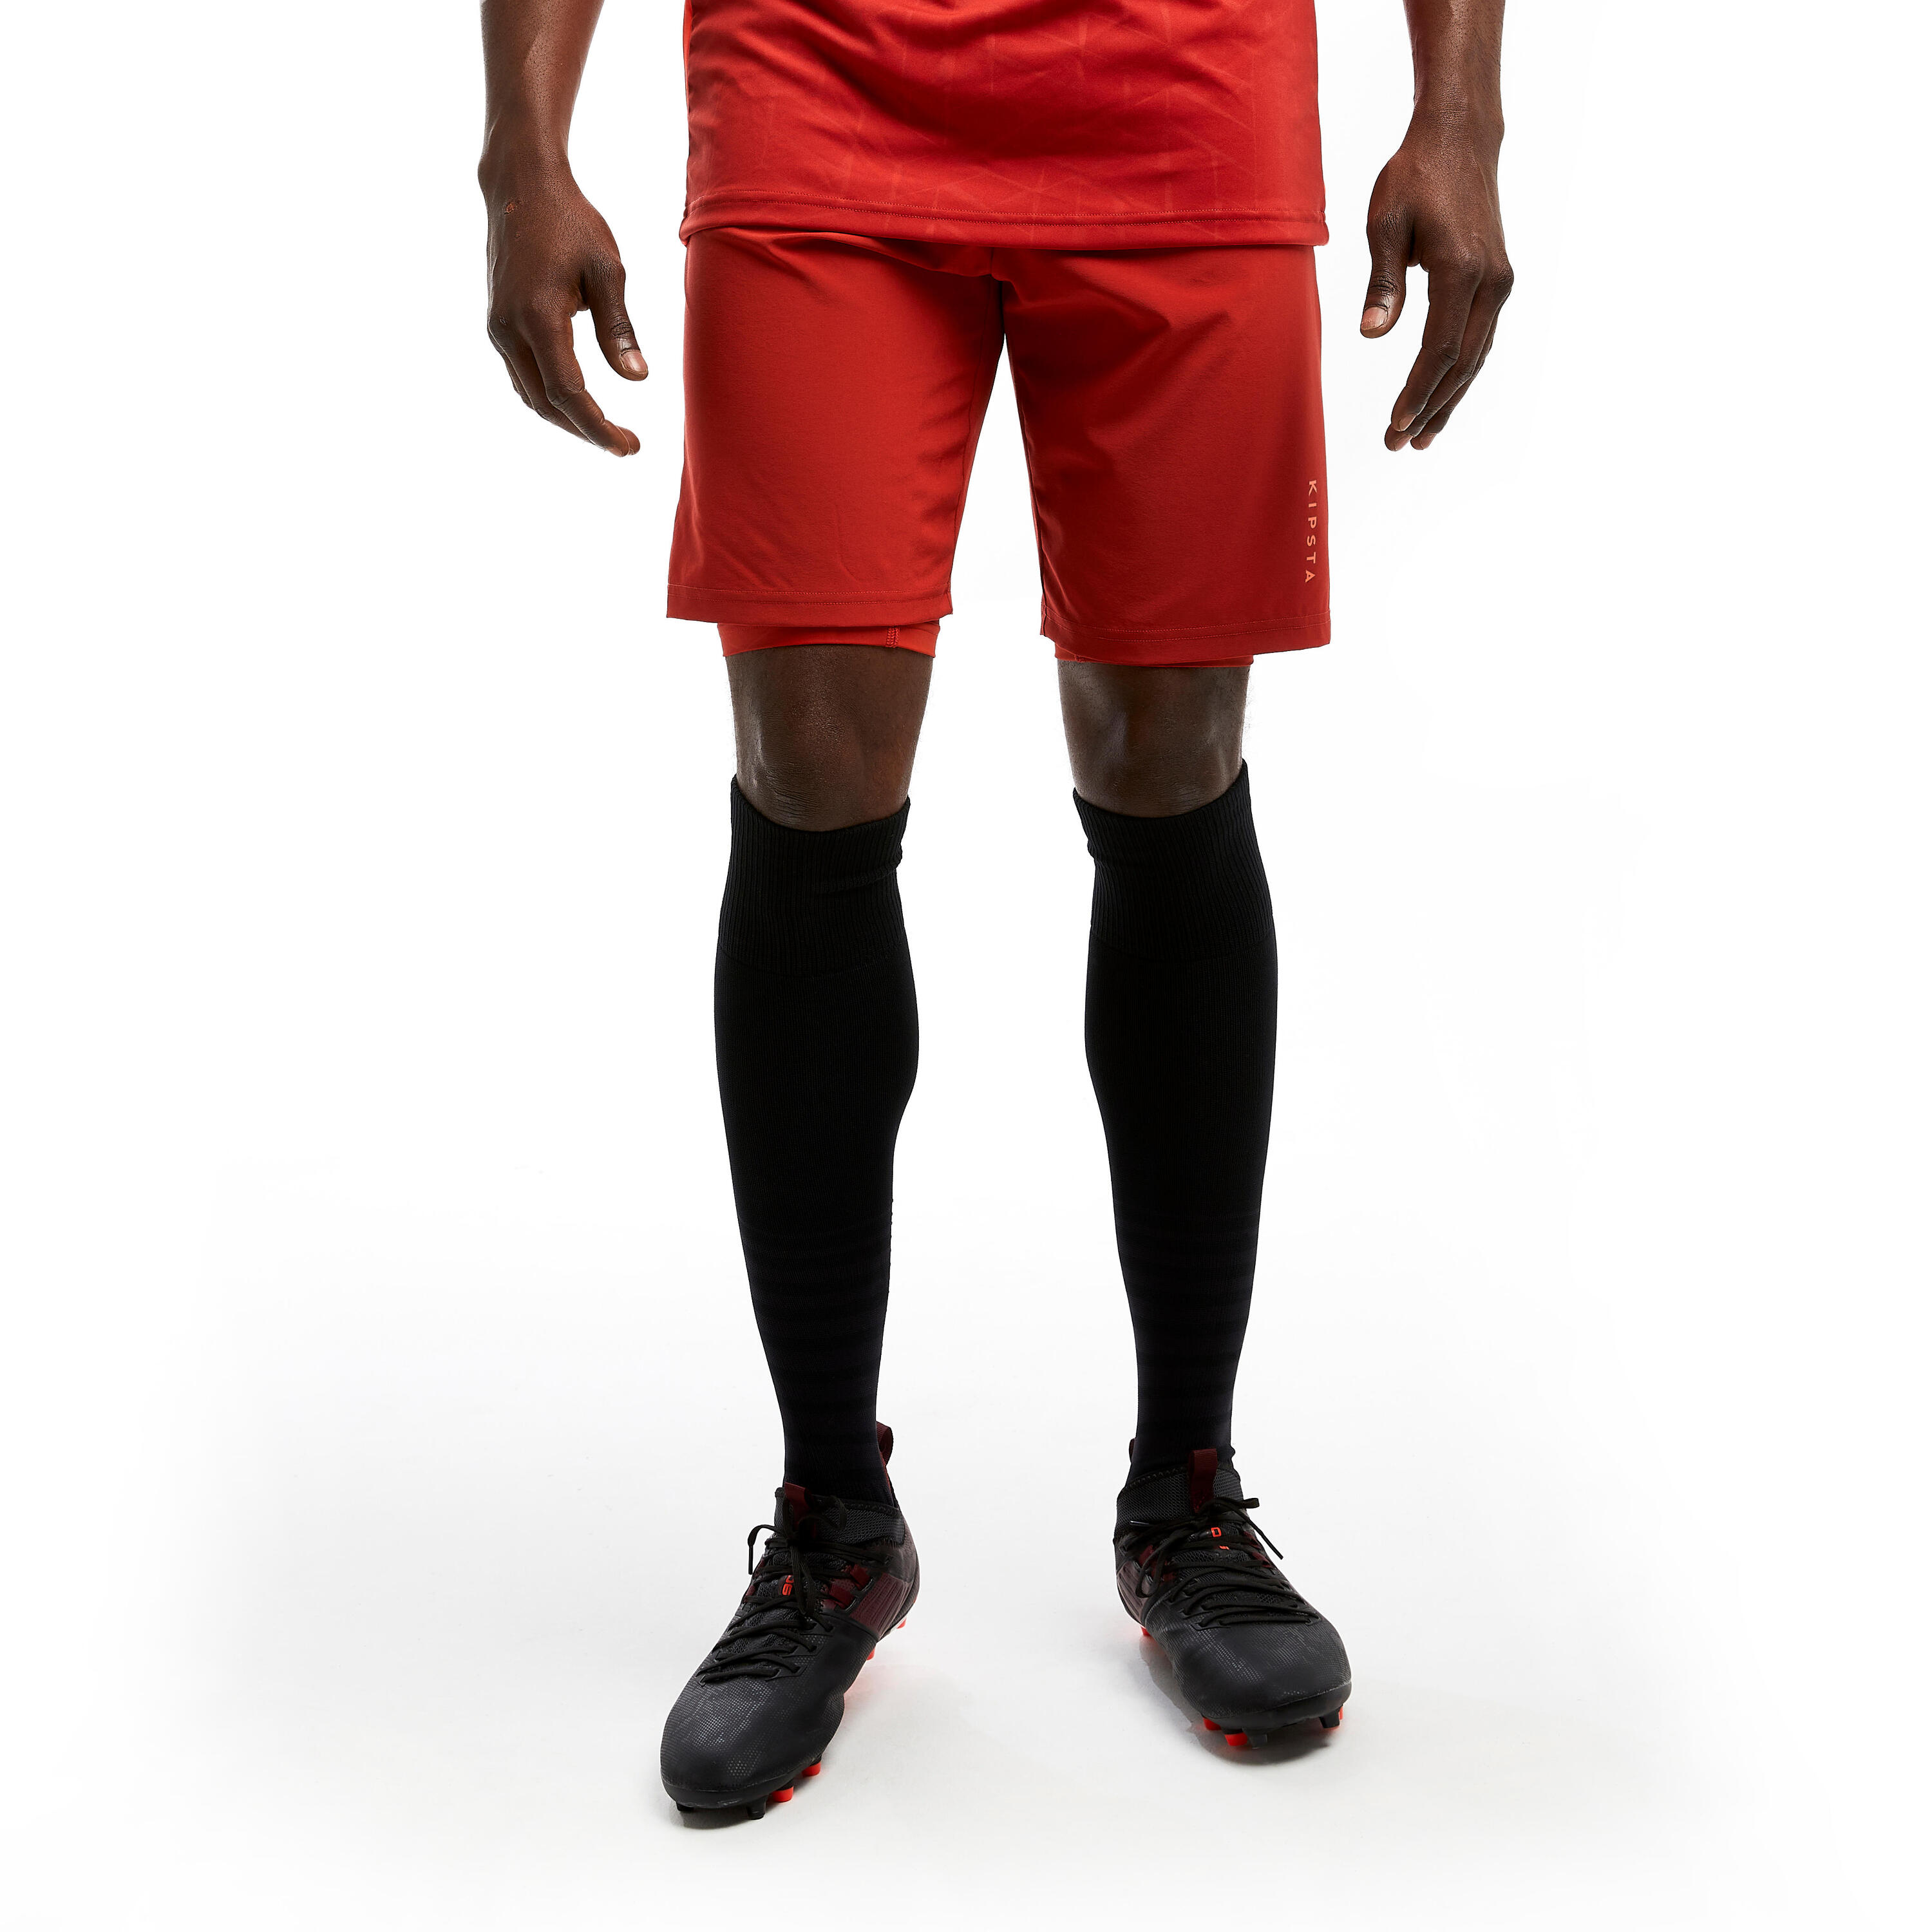 Adult 3-in-1 Football Shorts Traxium - Red 3/8